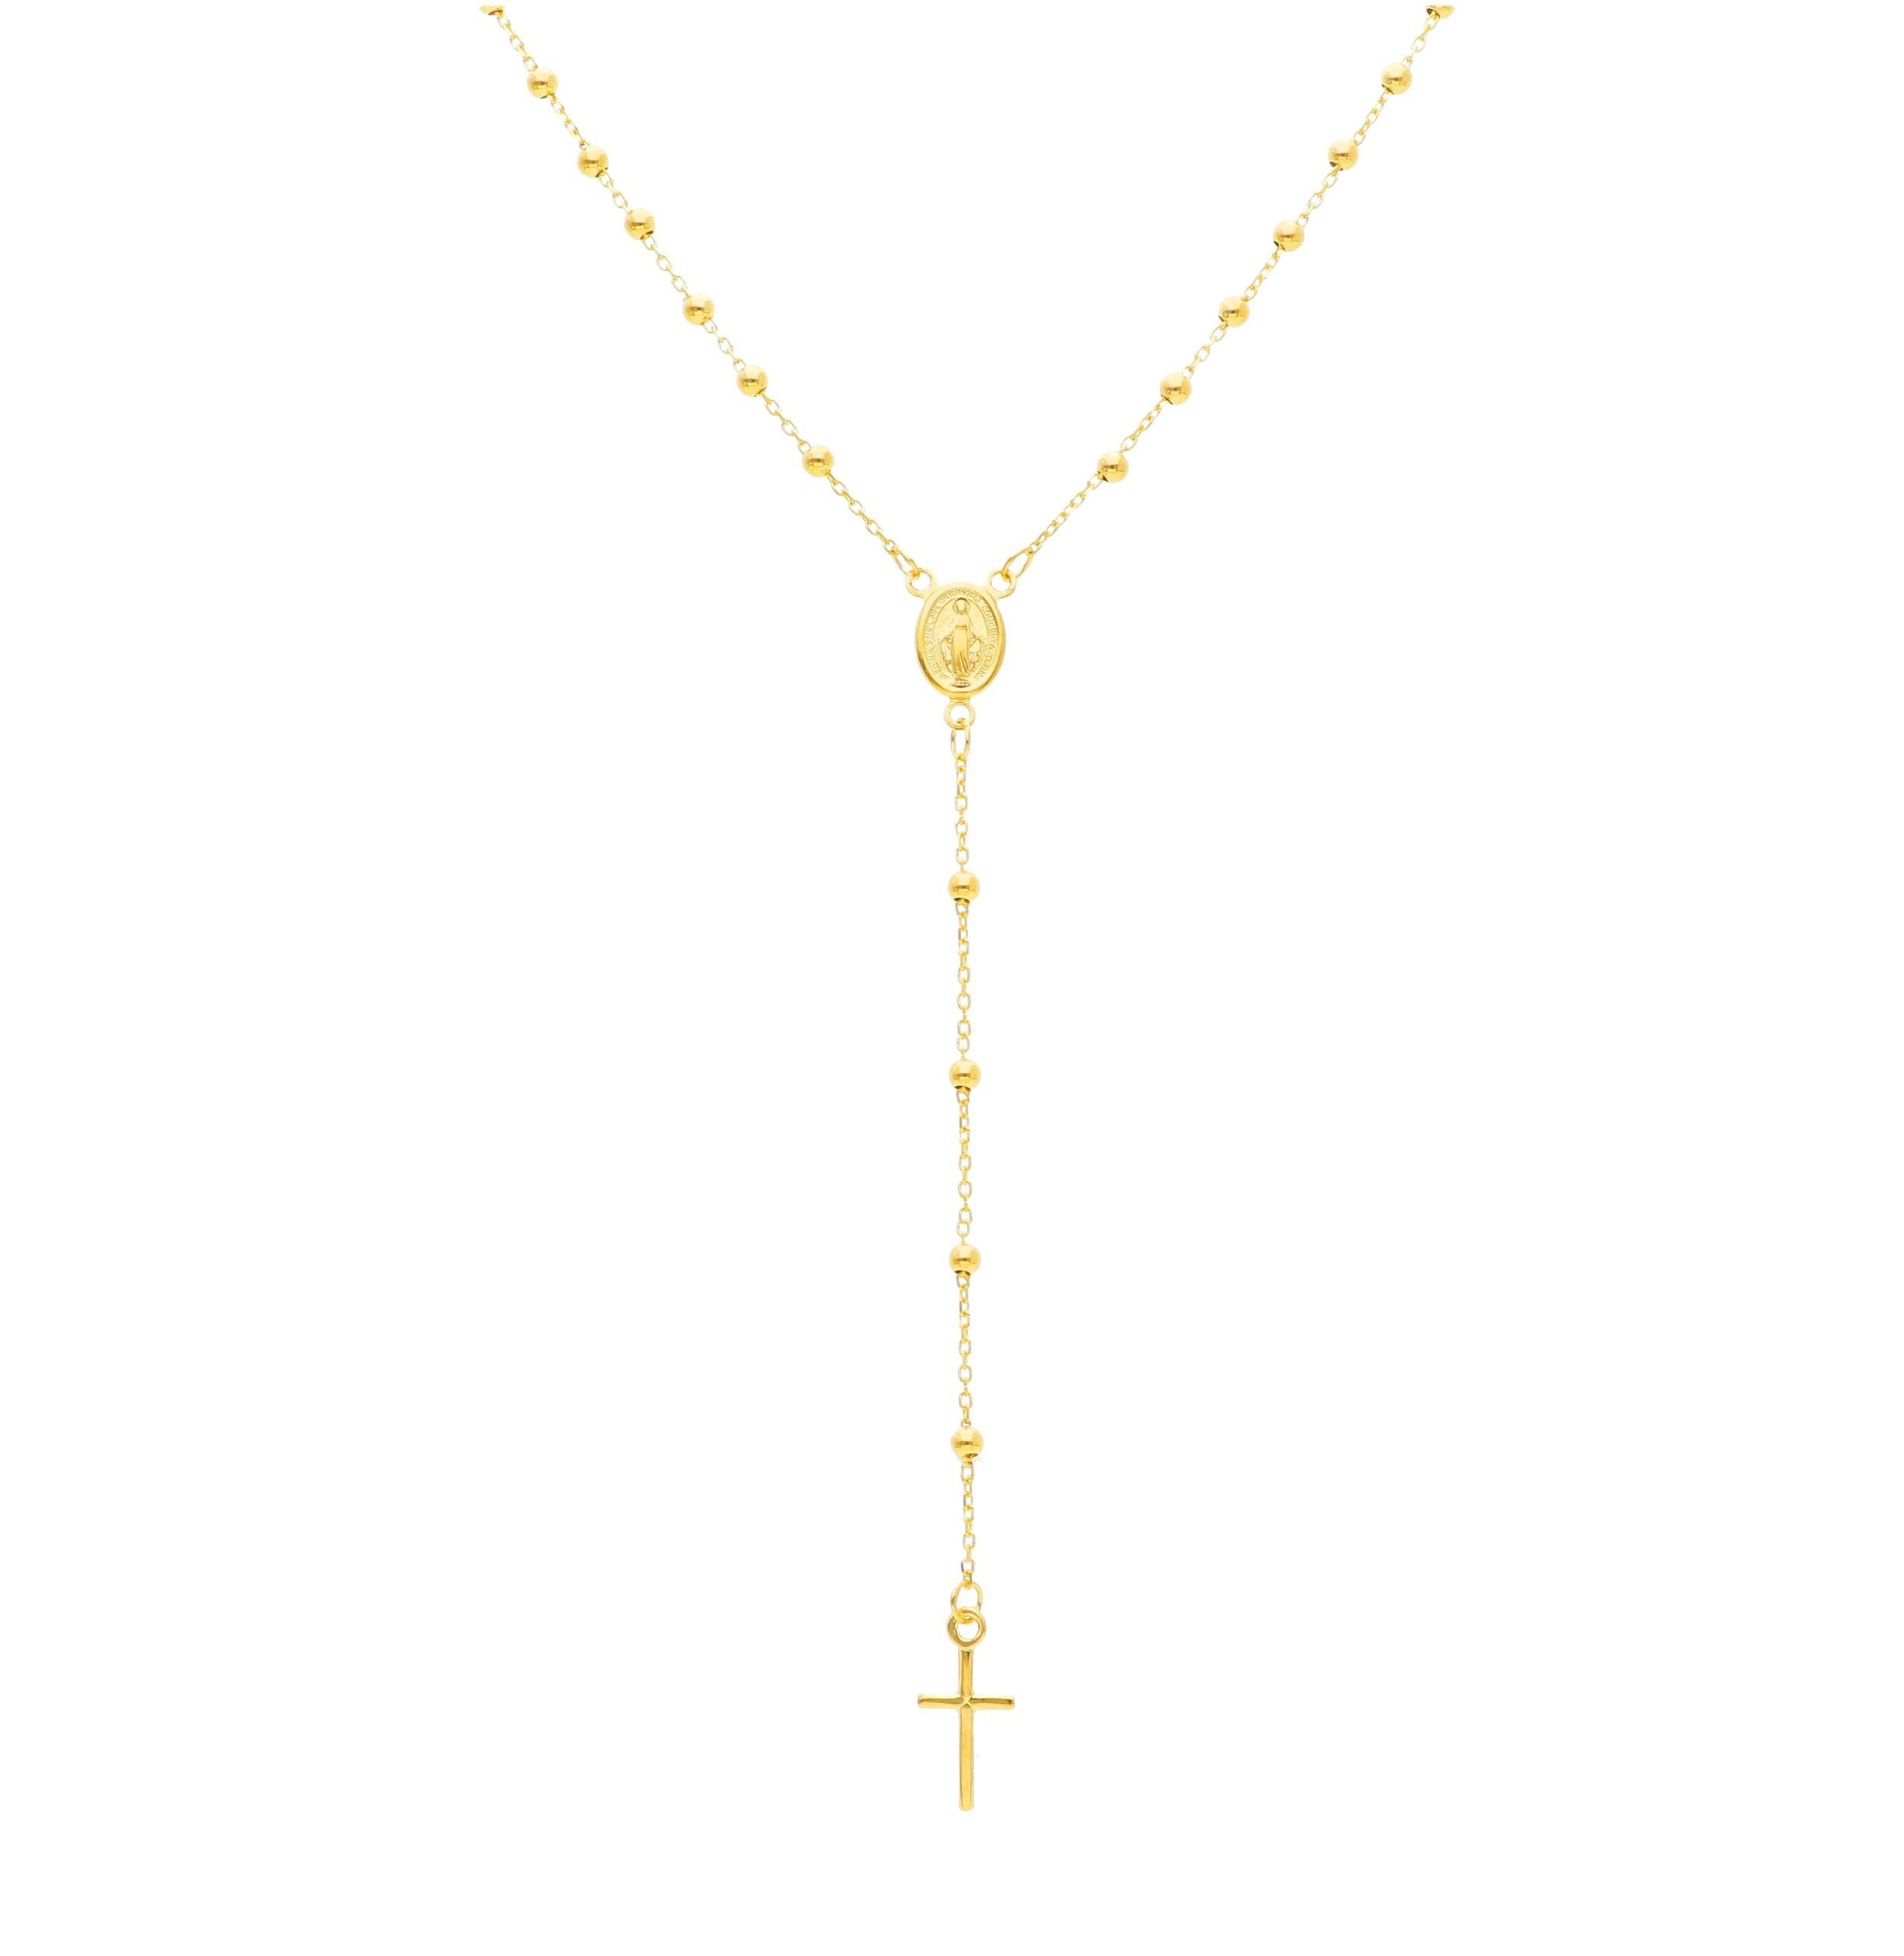 Golden rosary necklace k14   (code S254733)